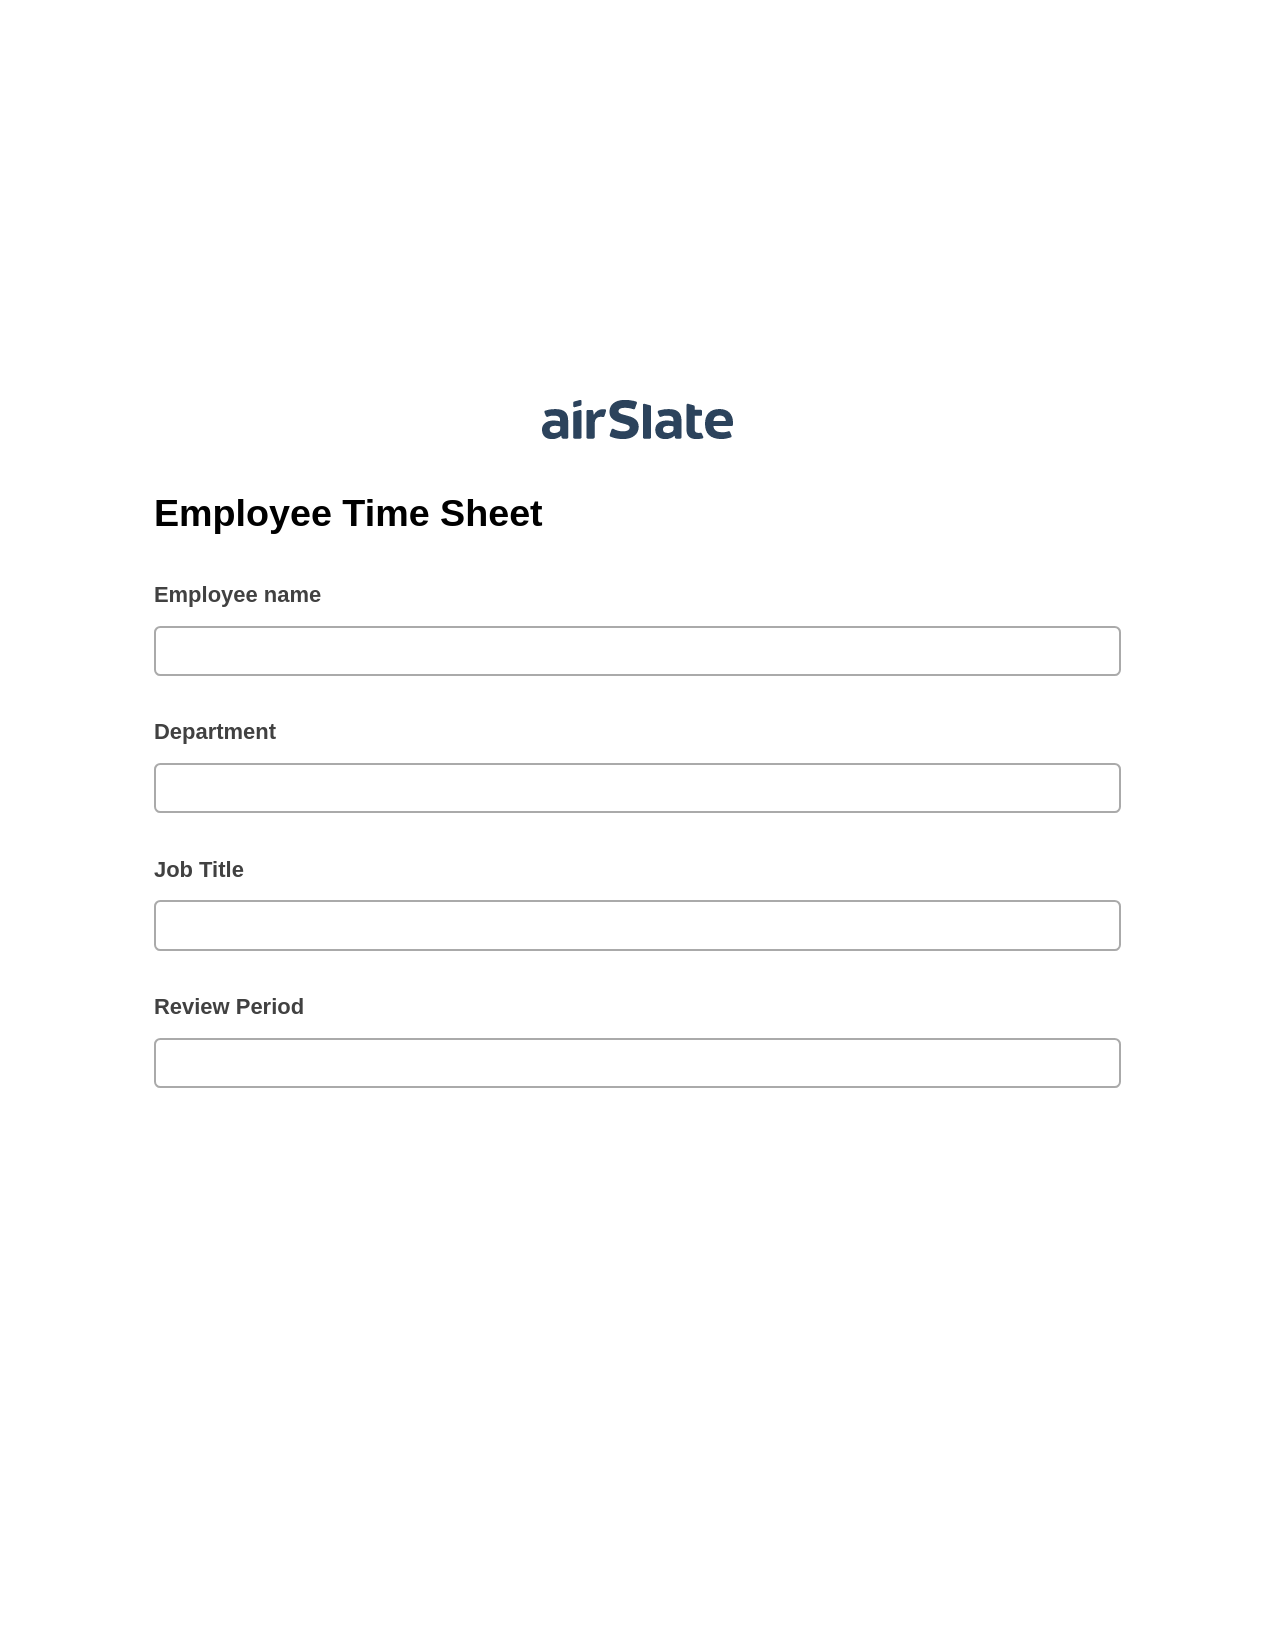 Multirole Employee Time Sheet Pre-fill Document Bot, Lock the Slate Bot, Export to Salesforce Record Bot